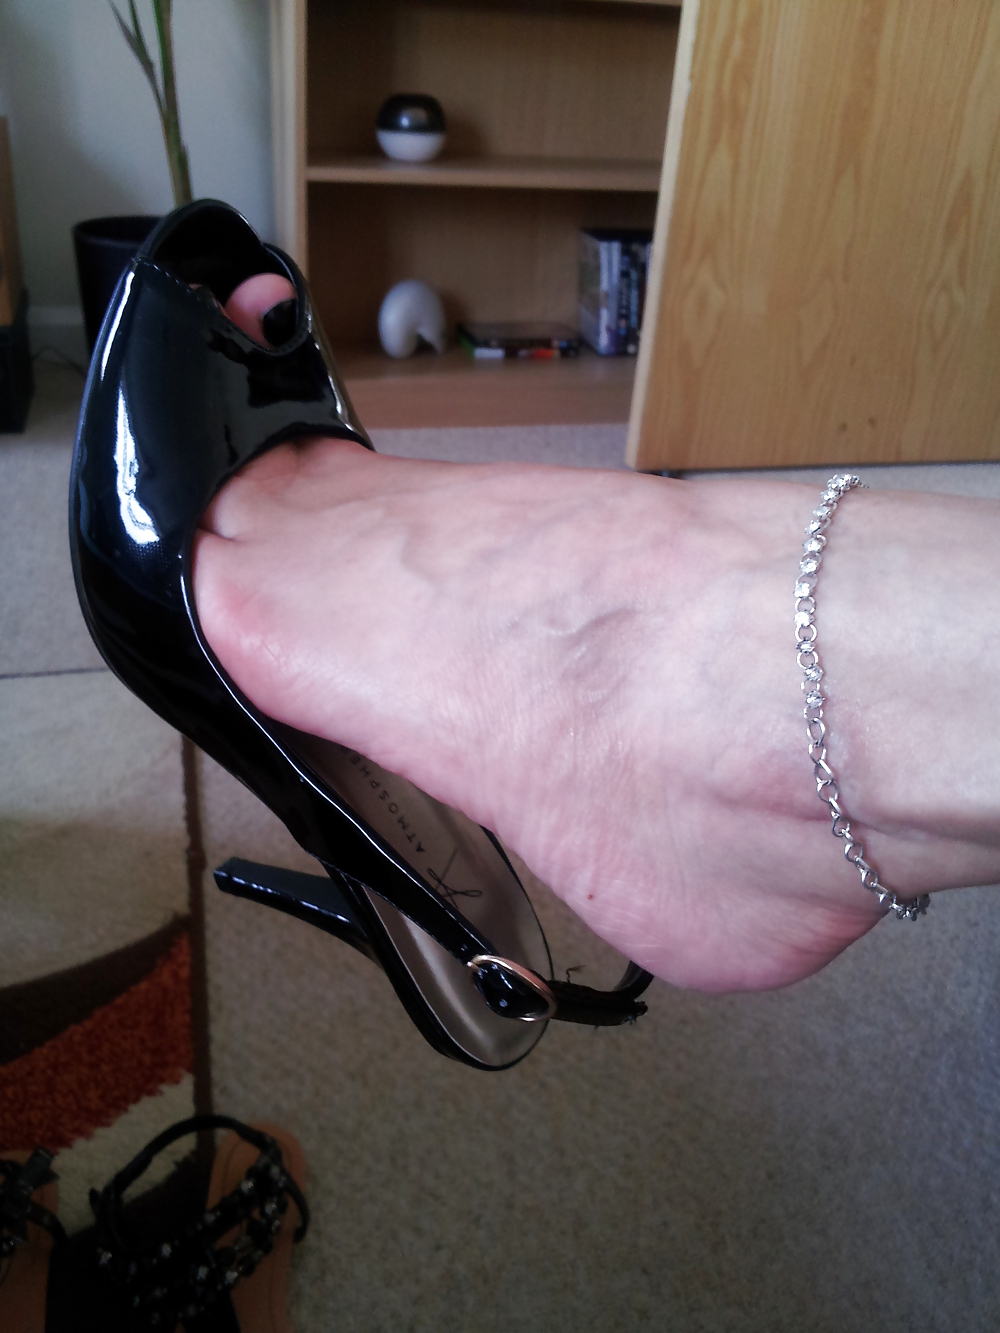 Sex my sexy new peep toe shoes off my man image